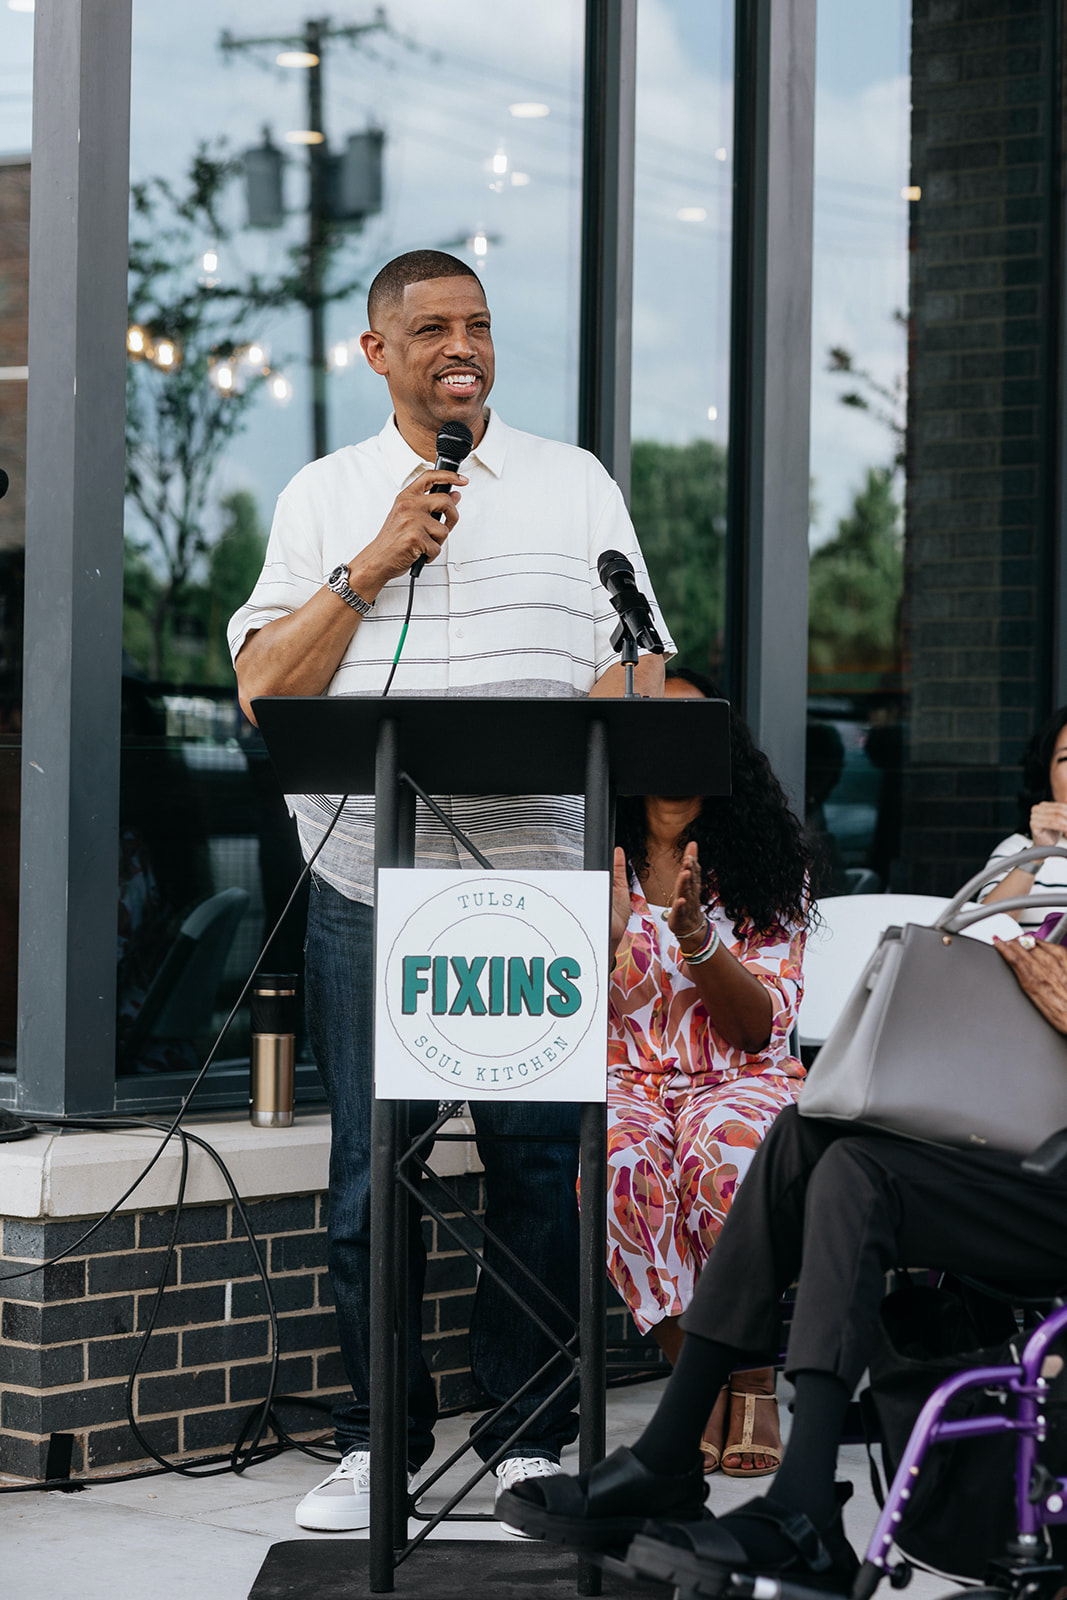 Kevin Johnson, Ananda Lewis and survivors of the Tulsa Race Massacre attend ribbon cutting for Fixins Soul Kitchen